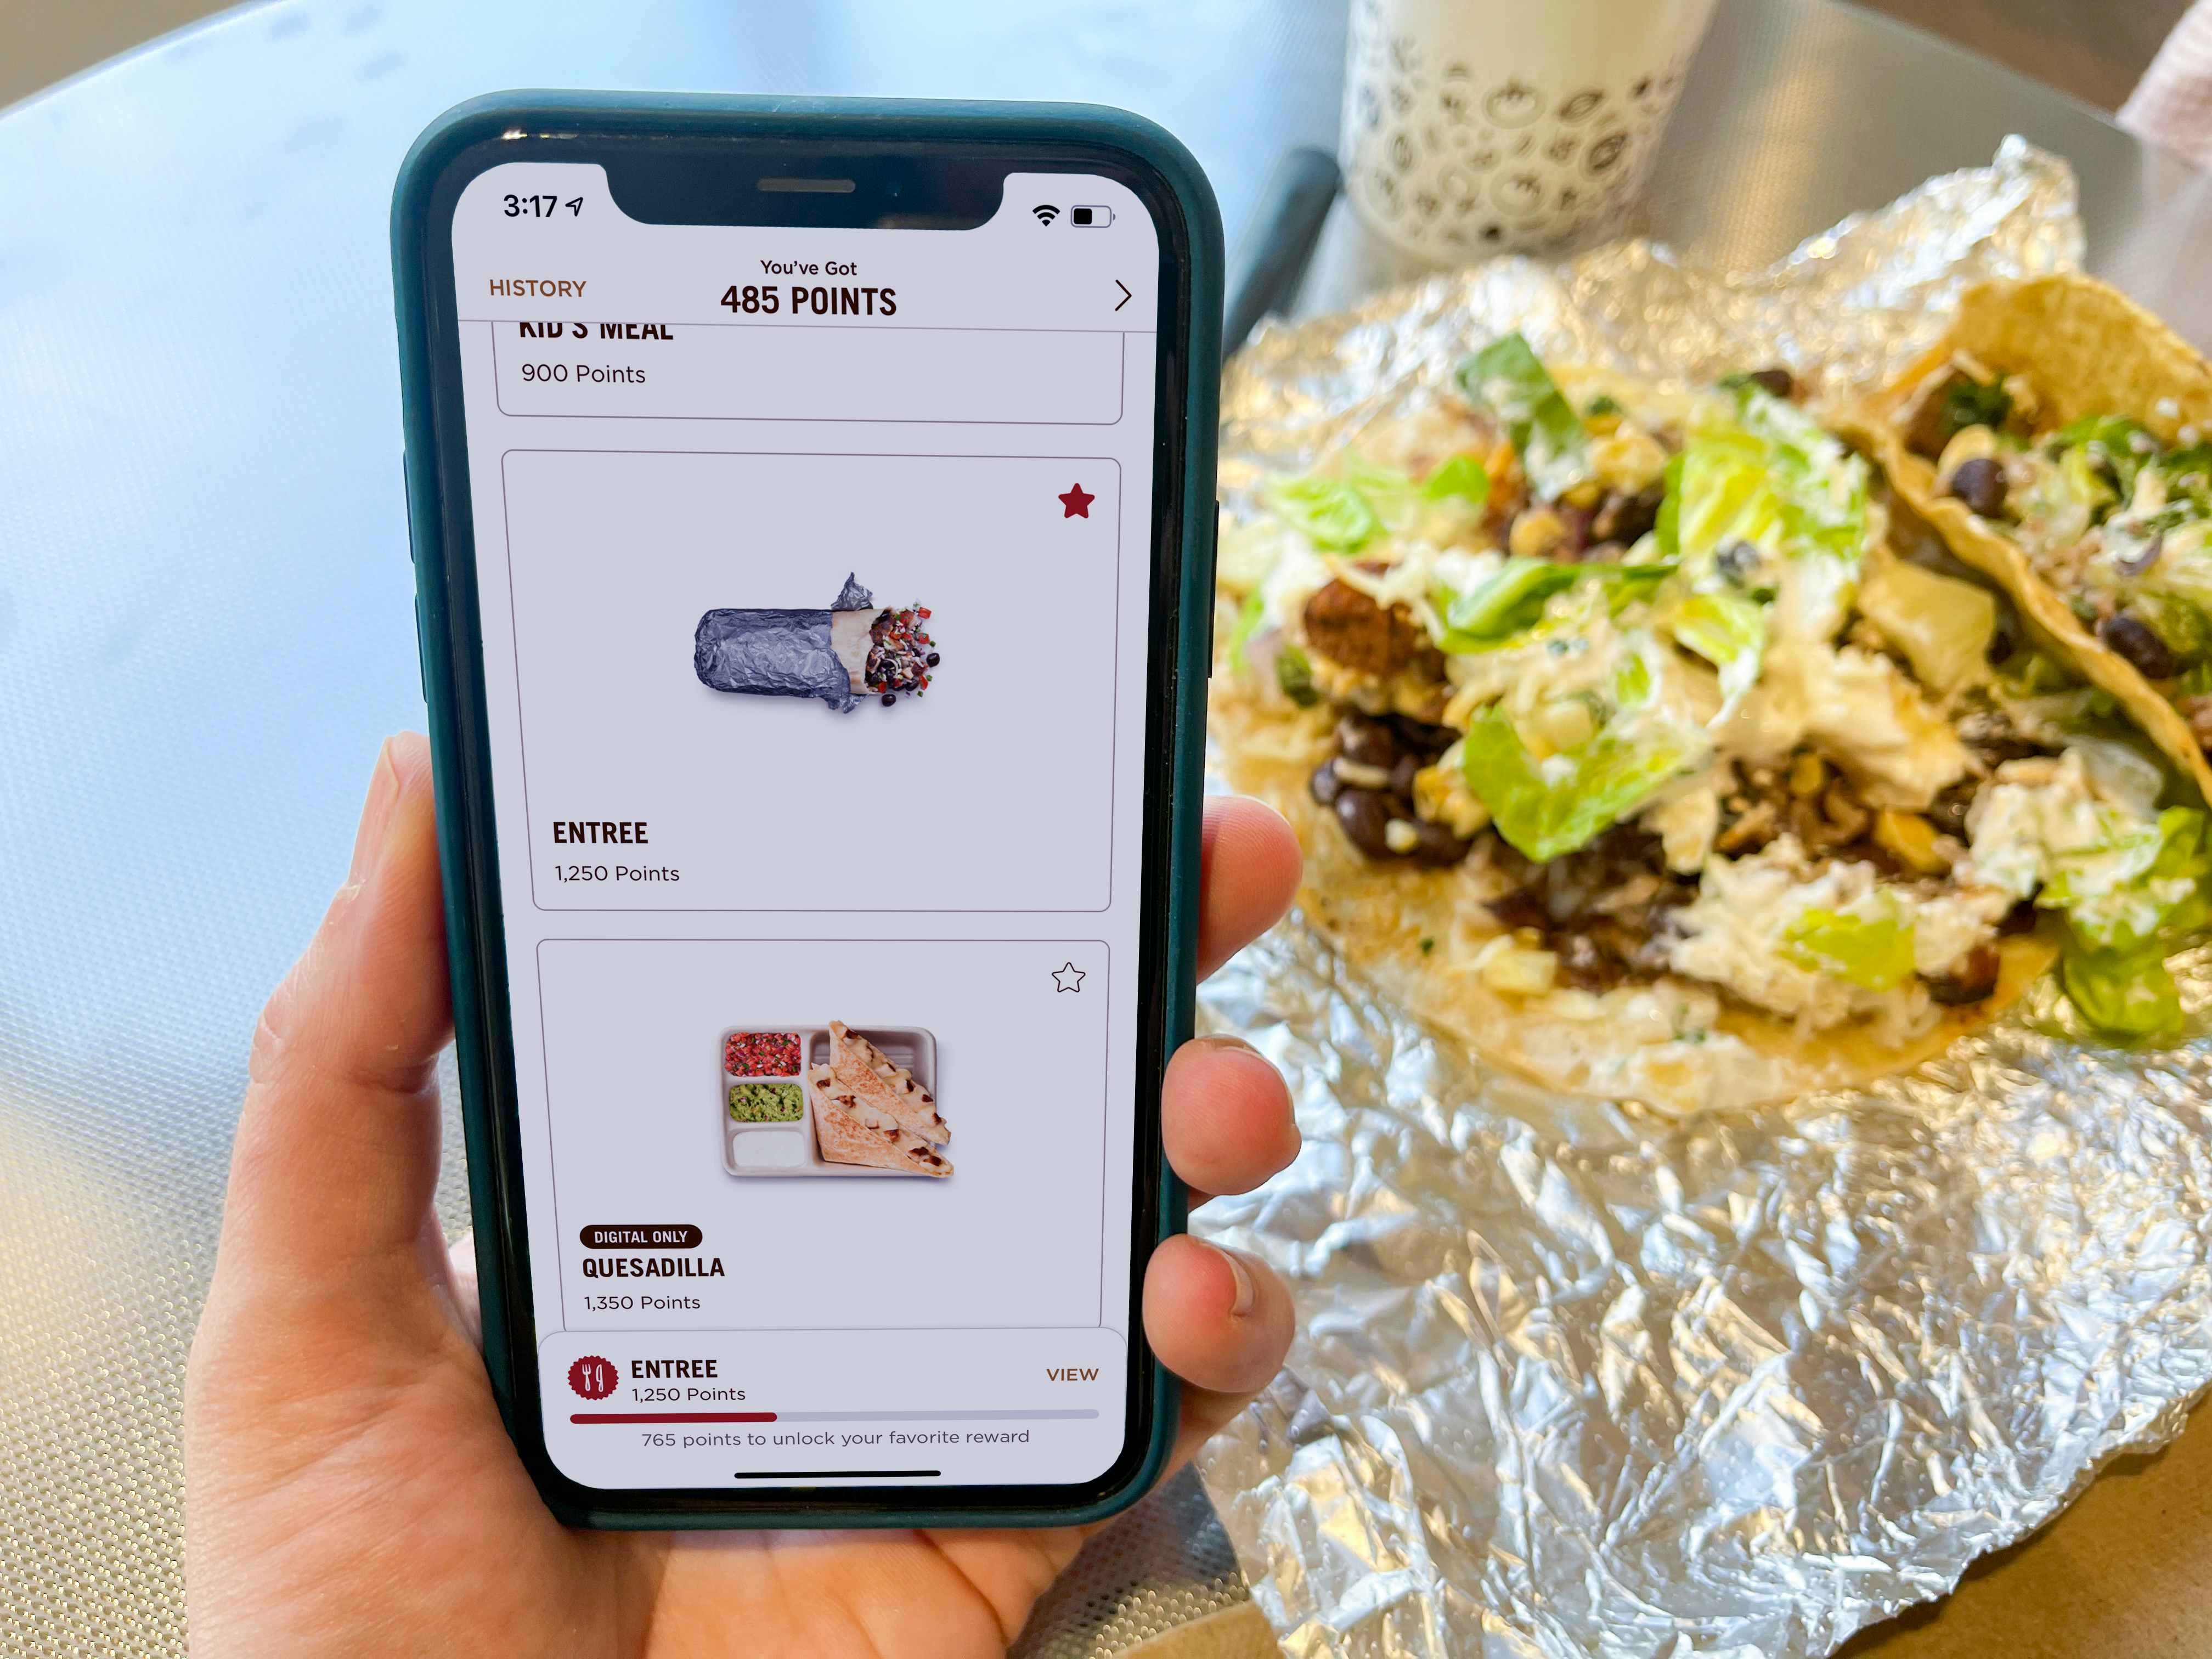 https://prod-cdn-thekrazycouponlady.imgix.net/wp-content/uploads/2018/04/chipotle-order-menu-phone-mockup-1642015829-1642015829.png?auto=format&fit=fill&q=25